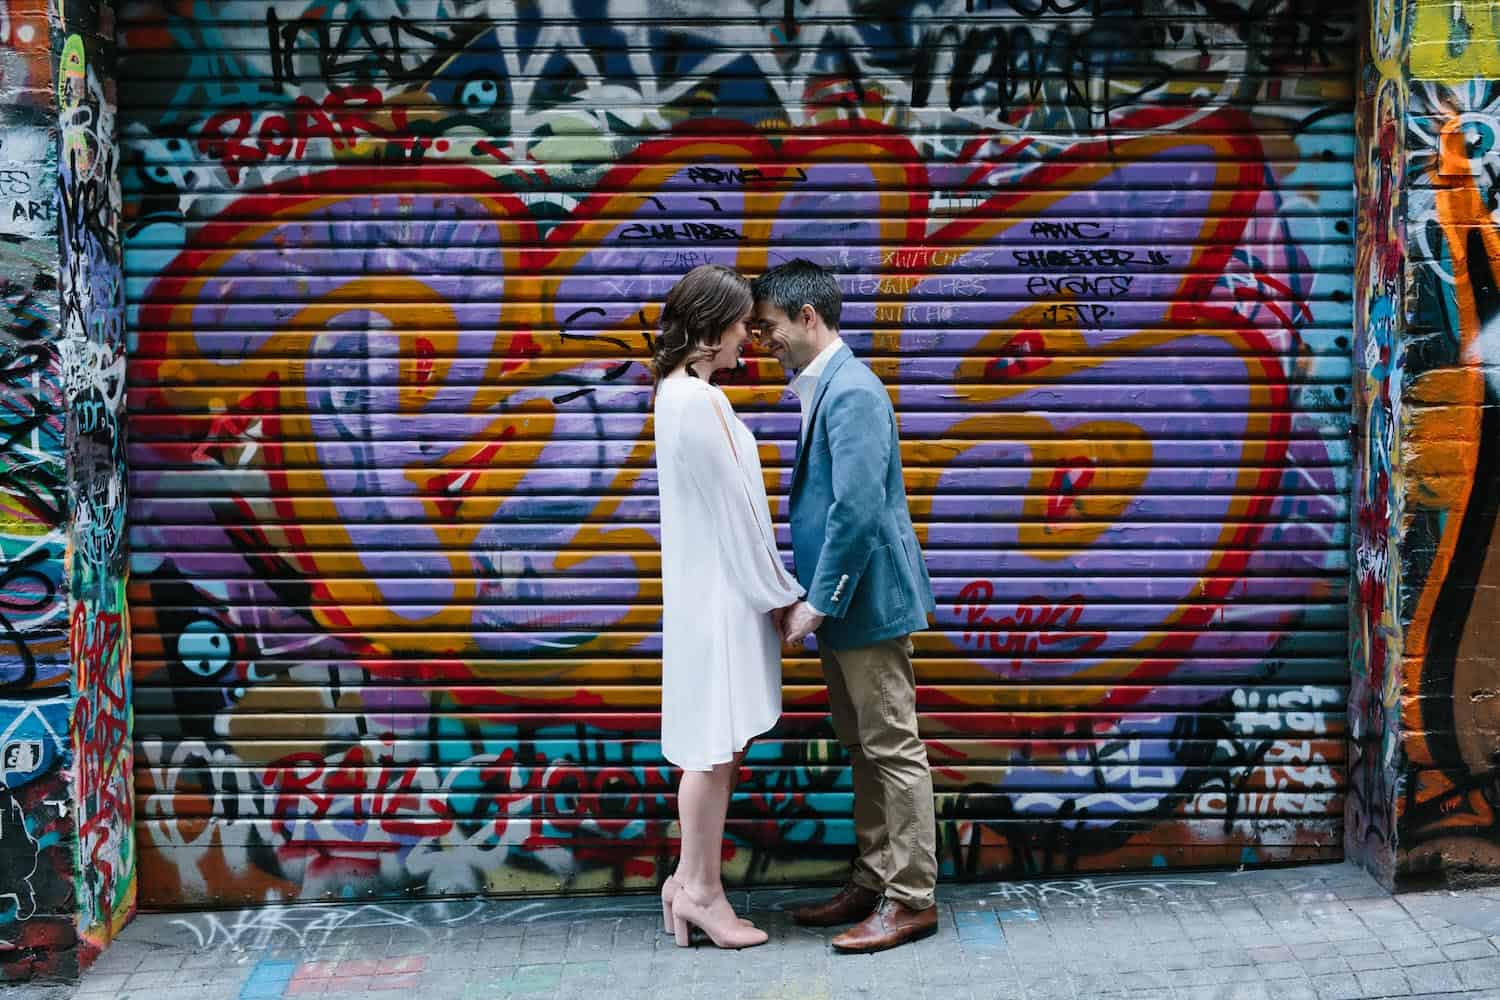 Engagement Photographer Melbourne Graffiti Walk Hosier Lane and Hardware Lane Engagement Shoot with Quila and Dave 8